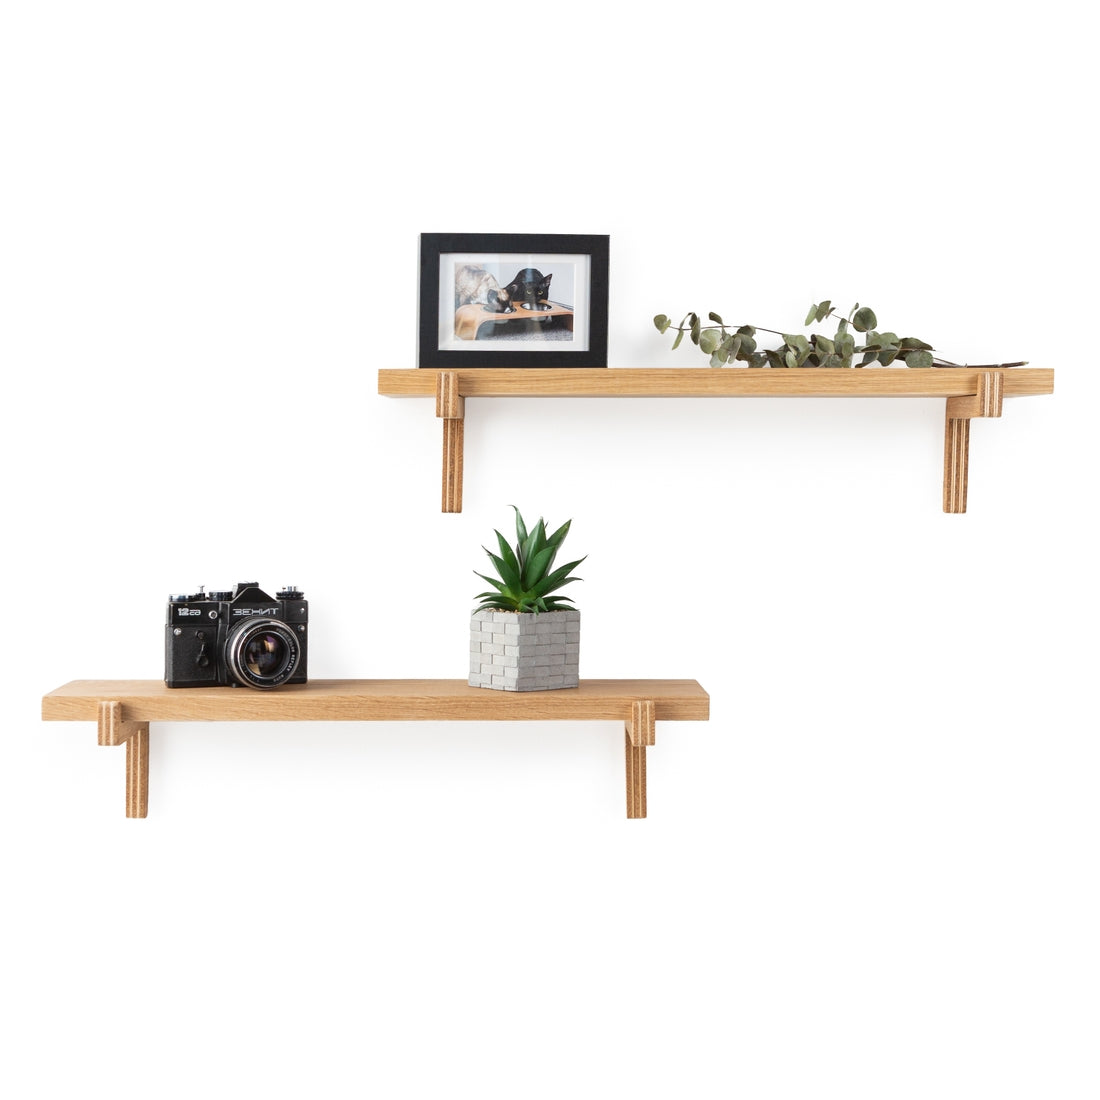 twin set of oak shelves against a white wall in an office